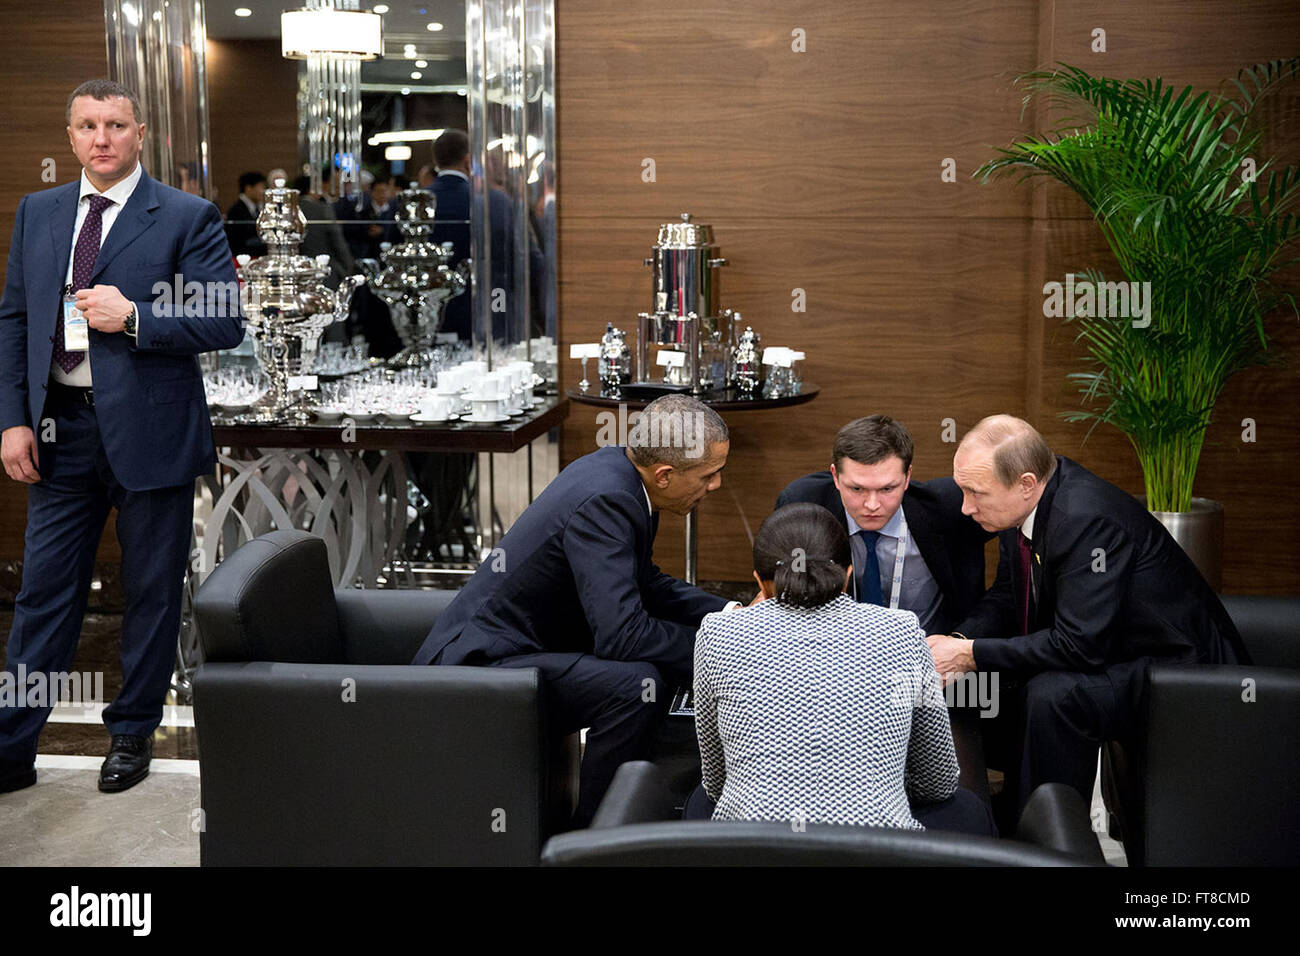 Nov. 15, 2015 'With a Russian security guard at left, the President meets with President Putin of Russia on the sidelines of the G20 Summit in Antalya, Turkey. National Security Advisor Susan E. Rice and a Russian interpreter sit alongside the two leaders.' (Official White House Photo by Pete Souza) Stock Photo